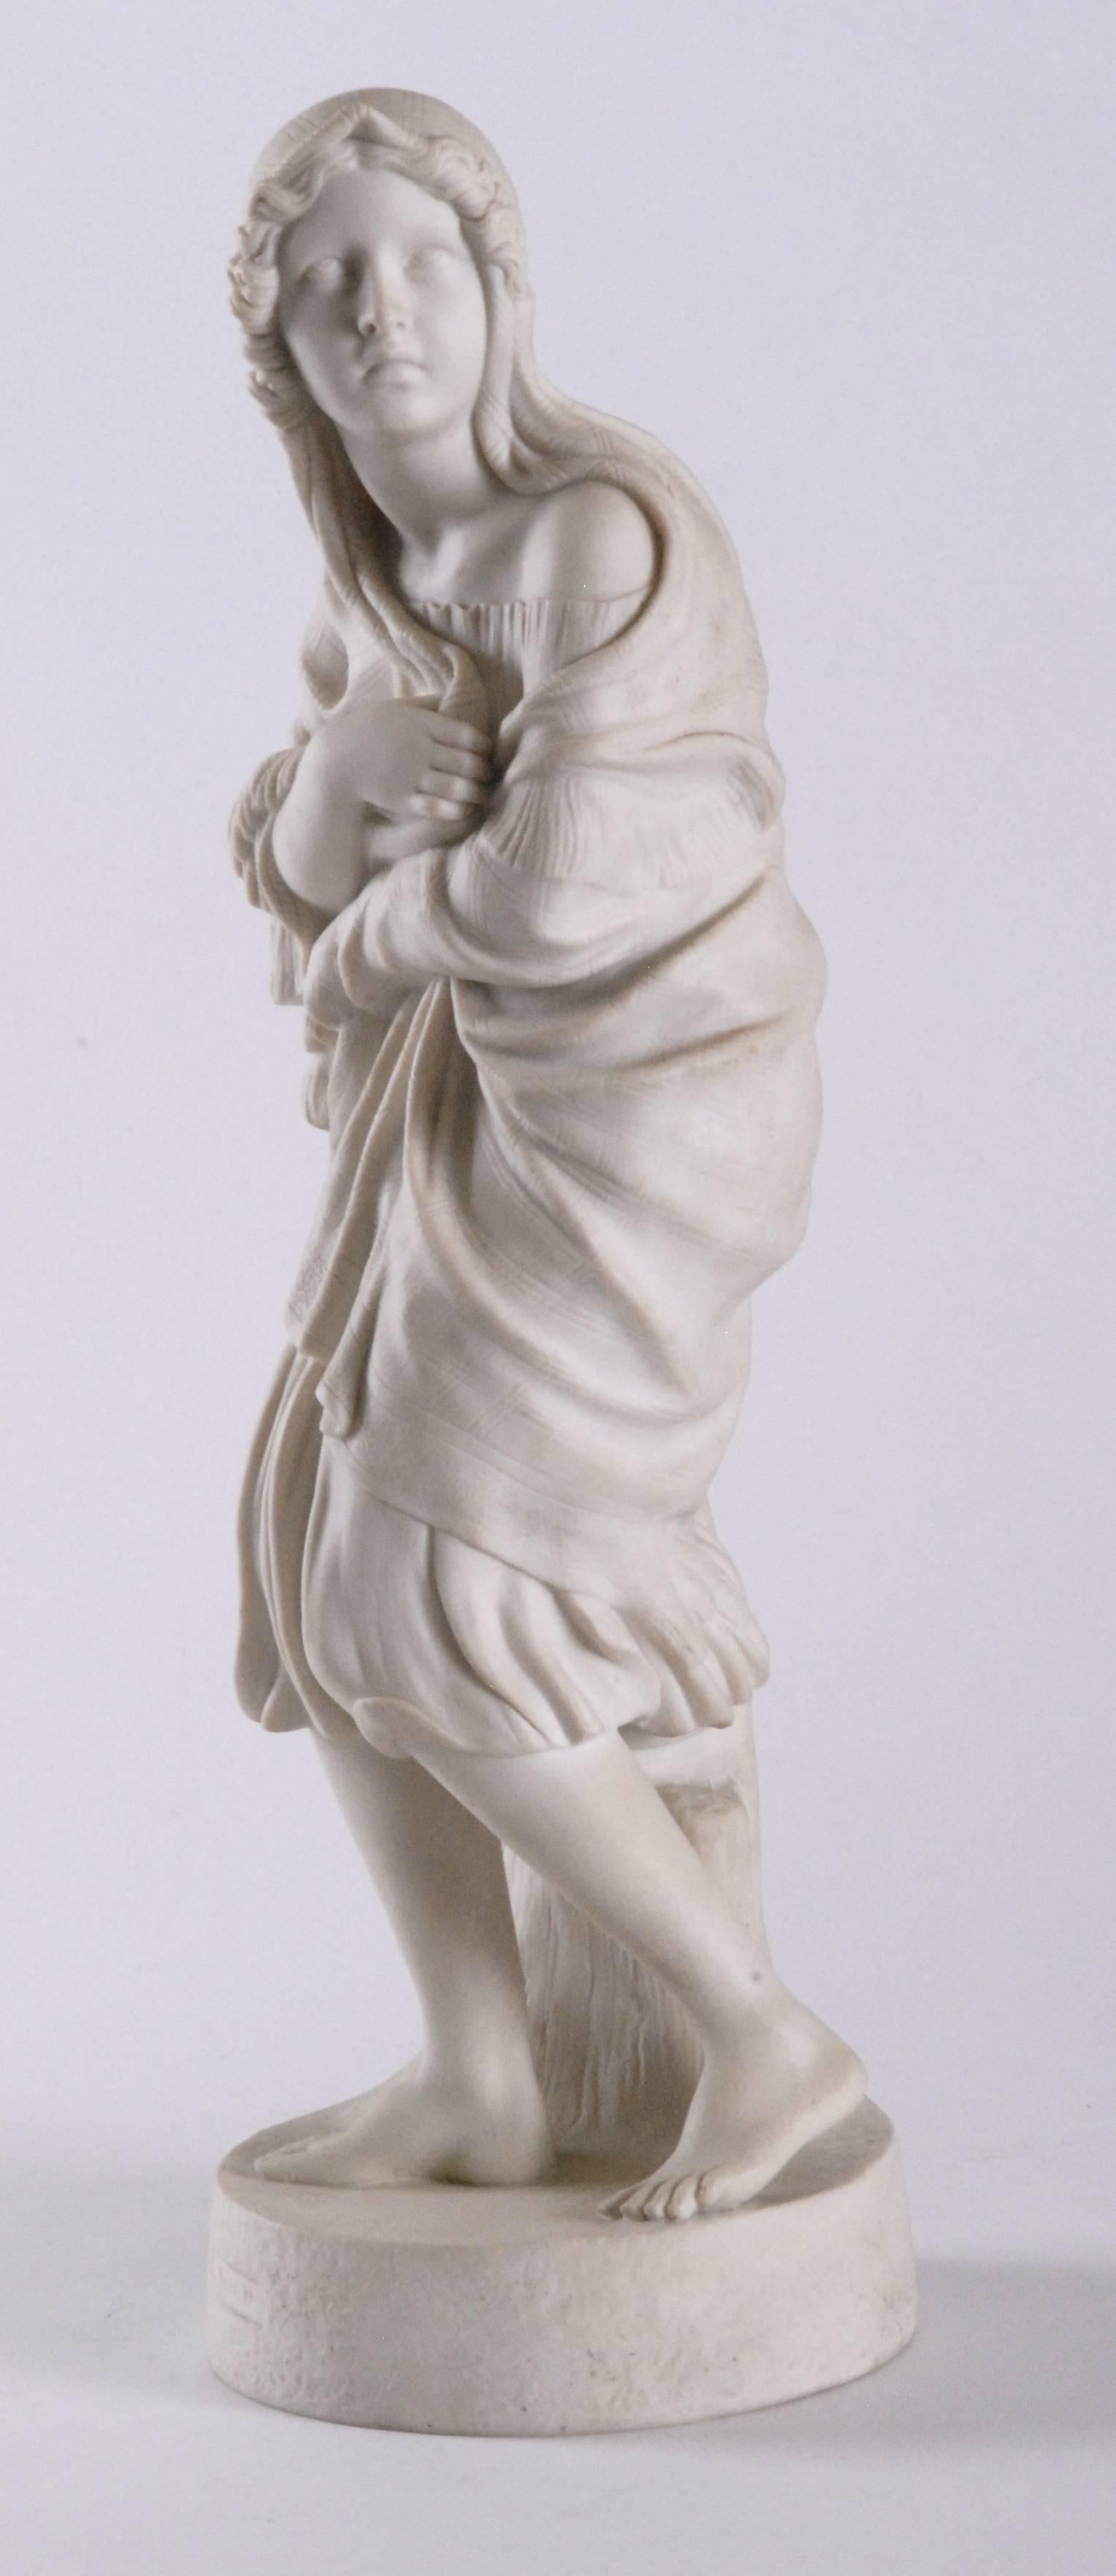 A Copeland [Spode] parian statue from a model by William Brodie, ARSA. SC, designed in 1858, fully stamped as shown. 'STORM' is stamped in a cartouche on the front of the circular base. England, c 1860. A beautifully modelled and sharply defined